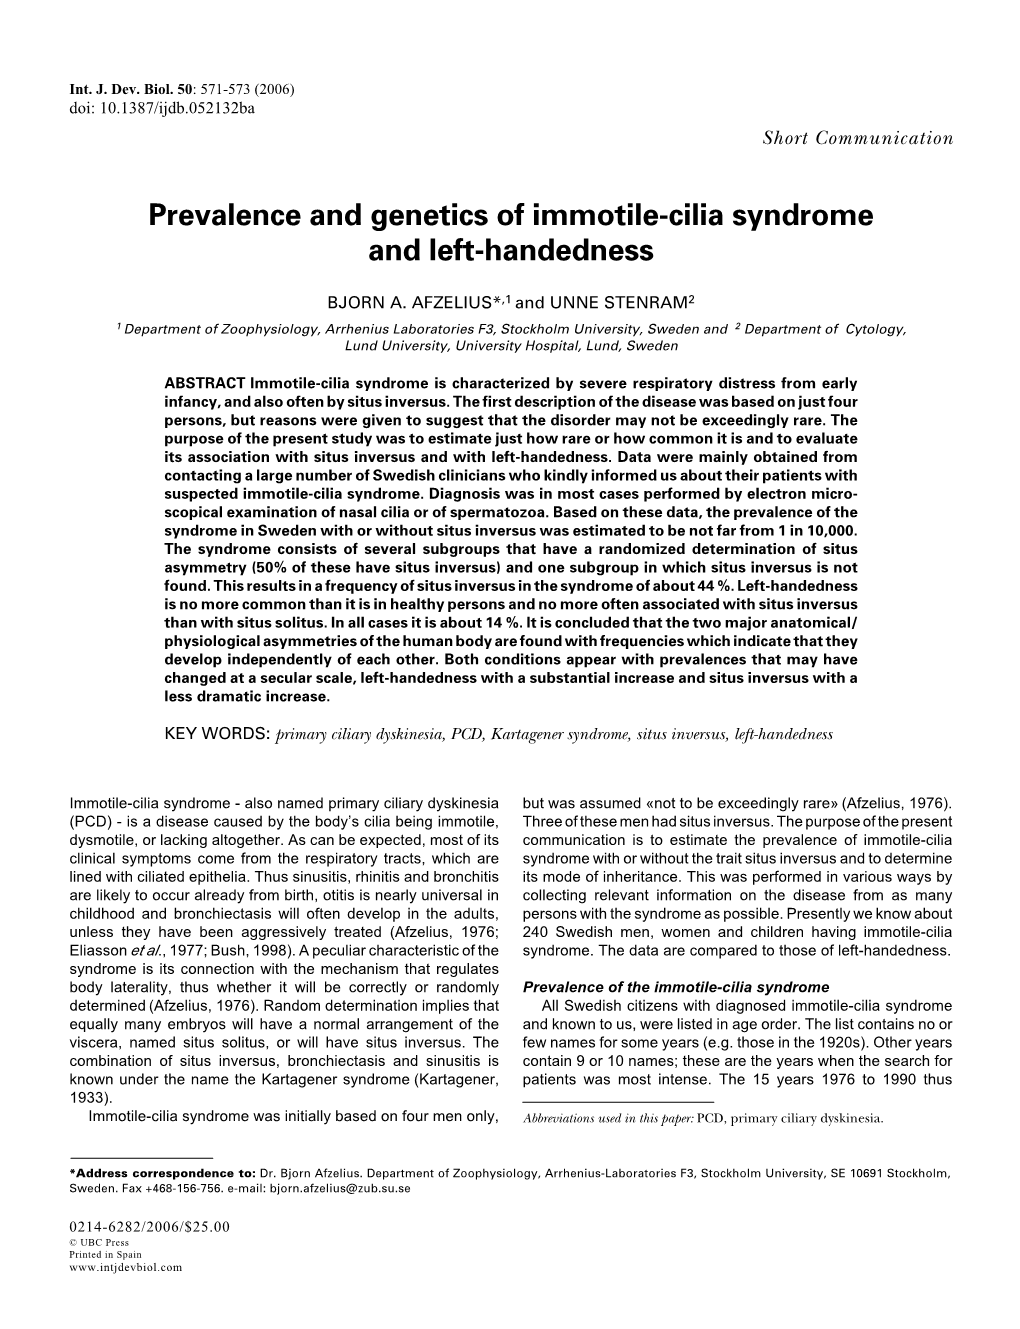 Prevalence and Genetics of Immotile-Cilia Syndrome and Left-Handedness